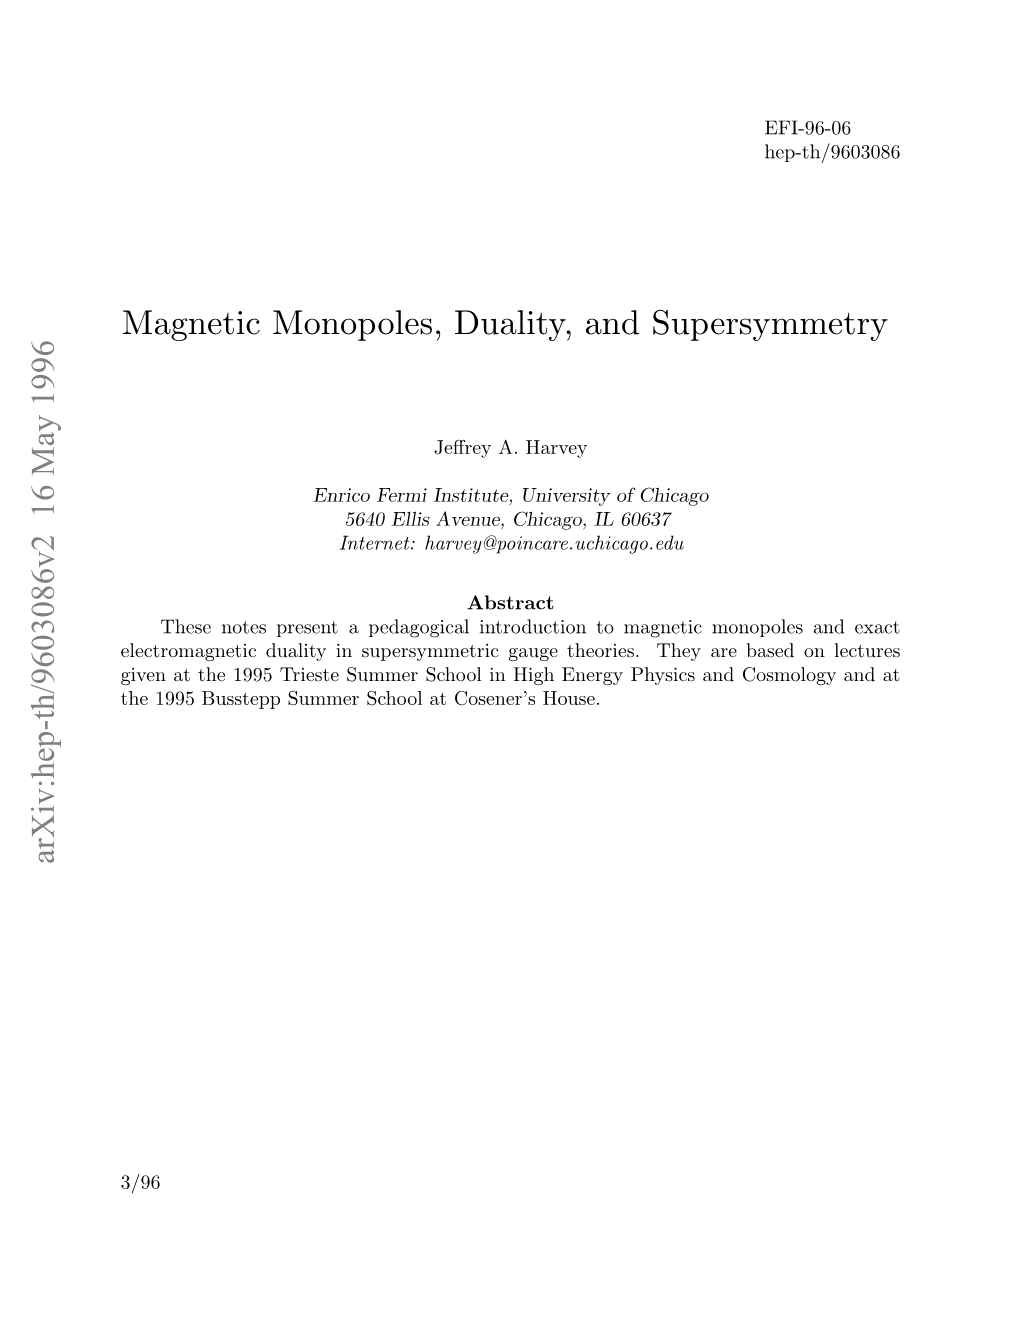 Magnetic Monopoles, Duality, and Supersymmetry